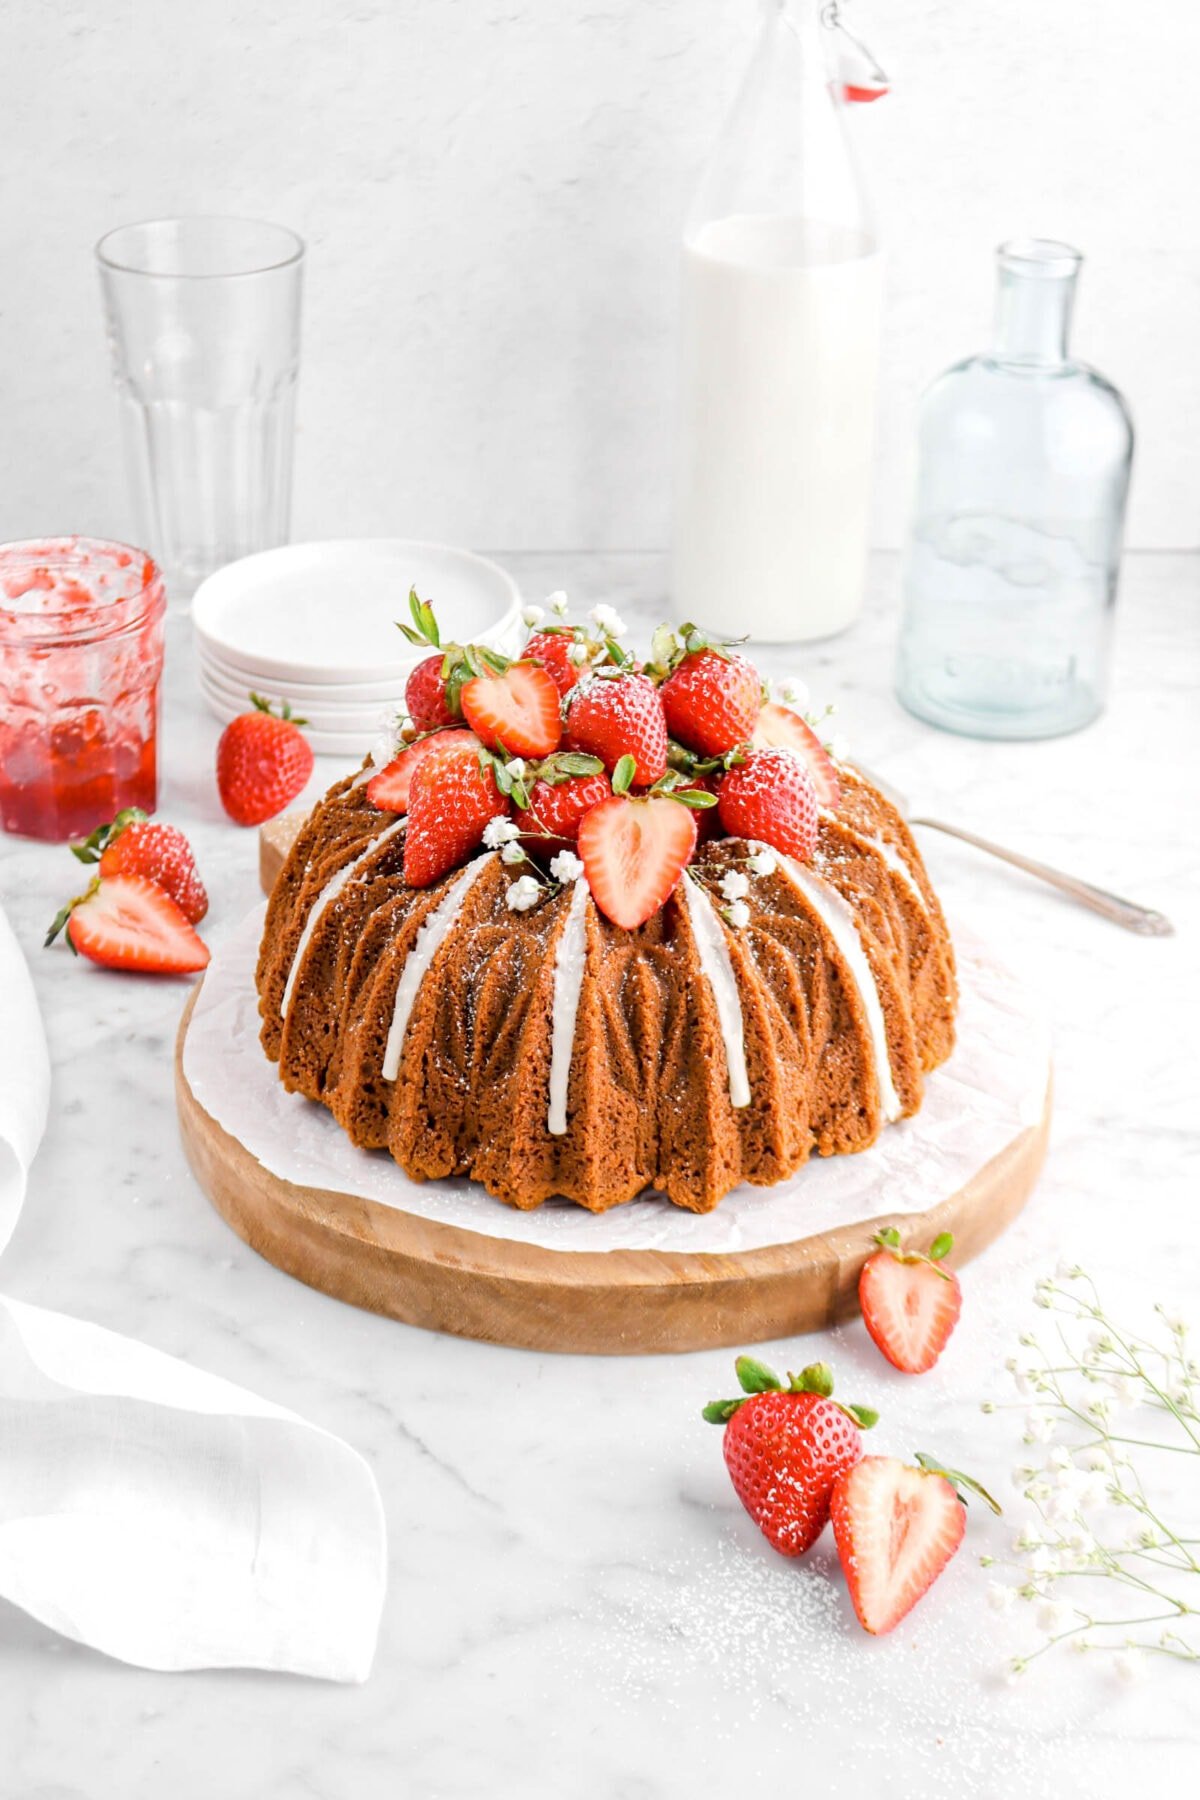 angled photo of bundt cake on wood board with icing dripping, fresh strawberries, white flowers, and powdered sugar on top, jam jar, stack of plates, empty vase, and jug of milk behind